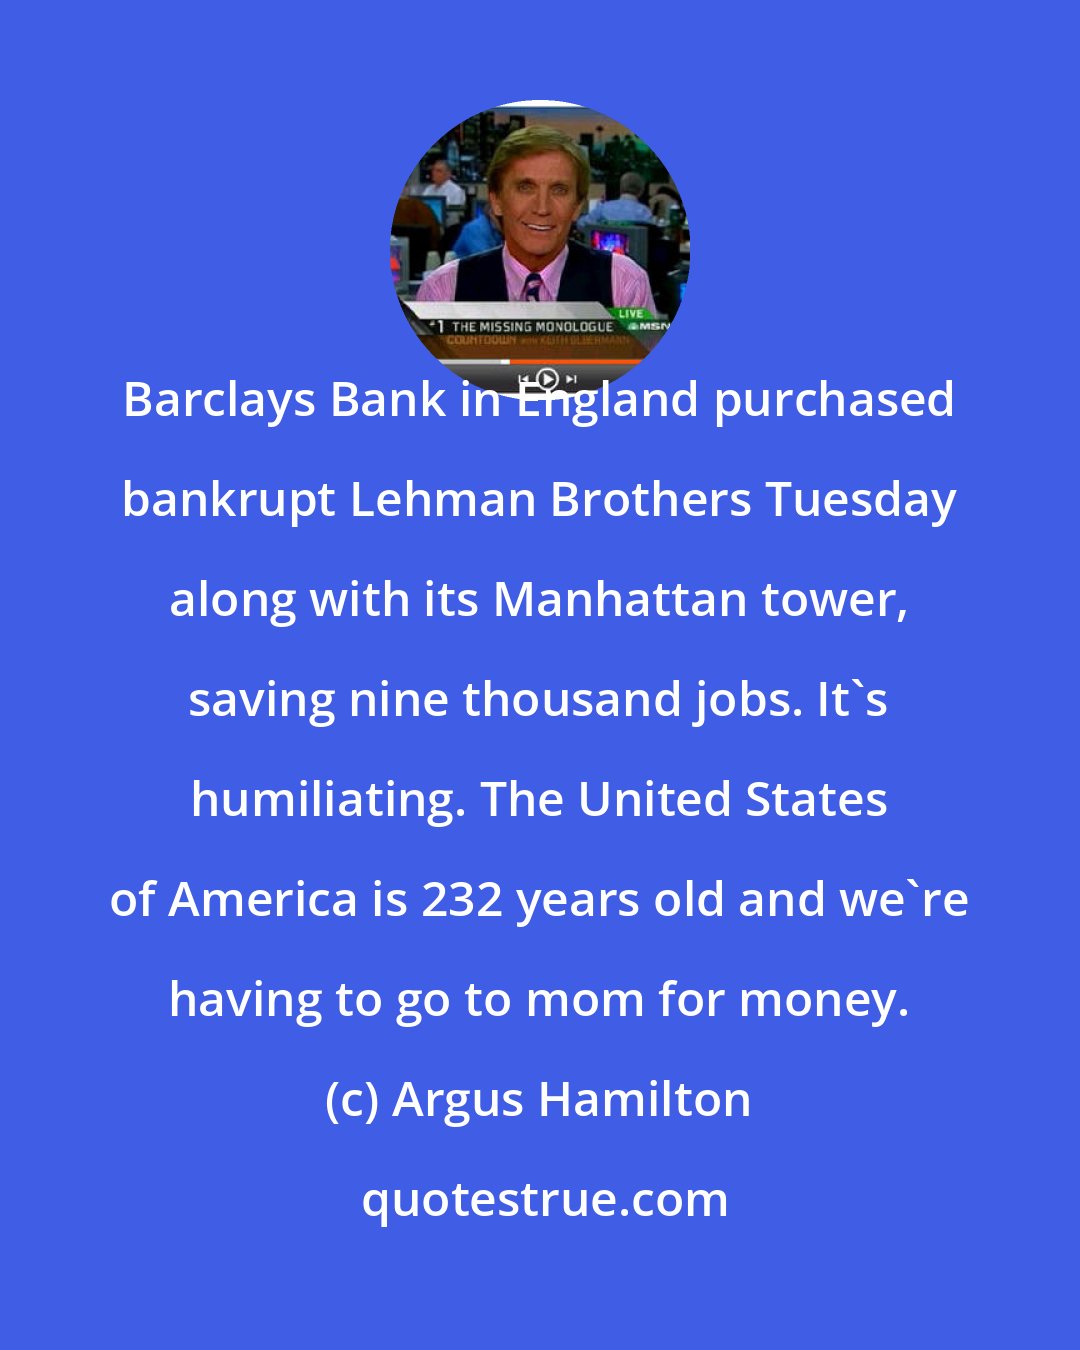 Argus Hamilton: Barclays Bank in England purchased bankrupt Lehman Brothers Tuesday along with its Manhattan tower, saving nine thousand jobs. It's humiliating. The United States of America is 232 years old and we're having to go to mom for money.